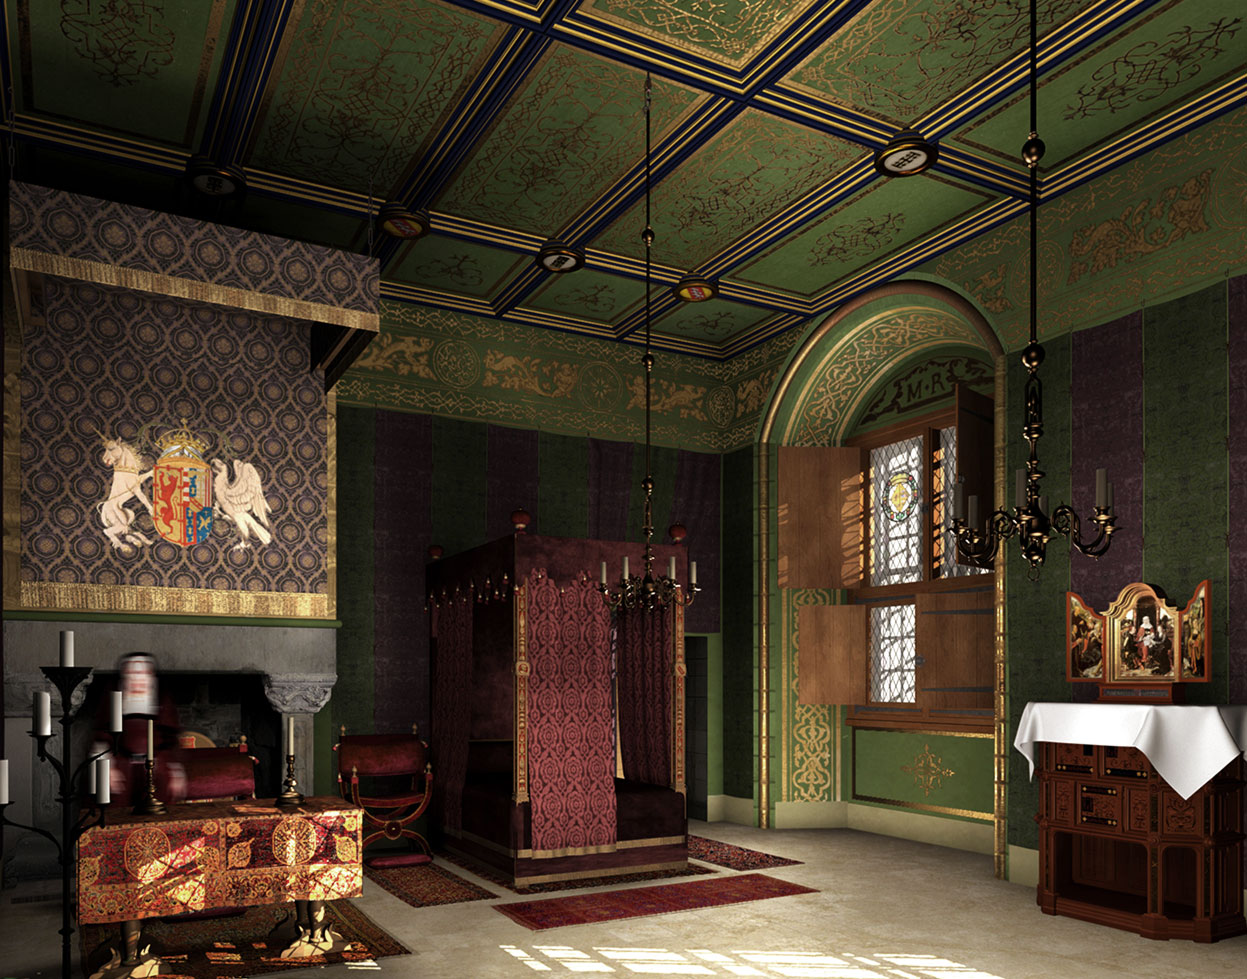 Bedchamber of Mary of Guise 1542